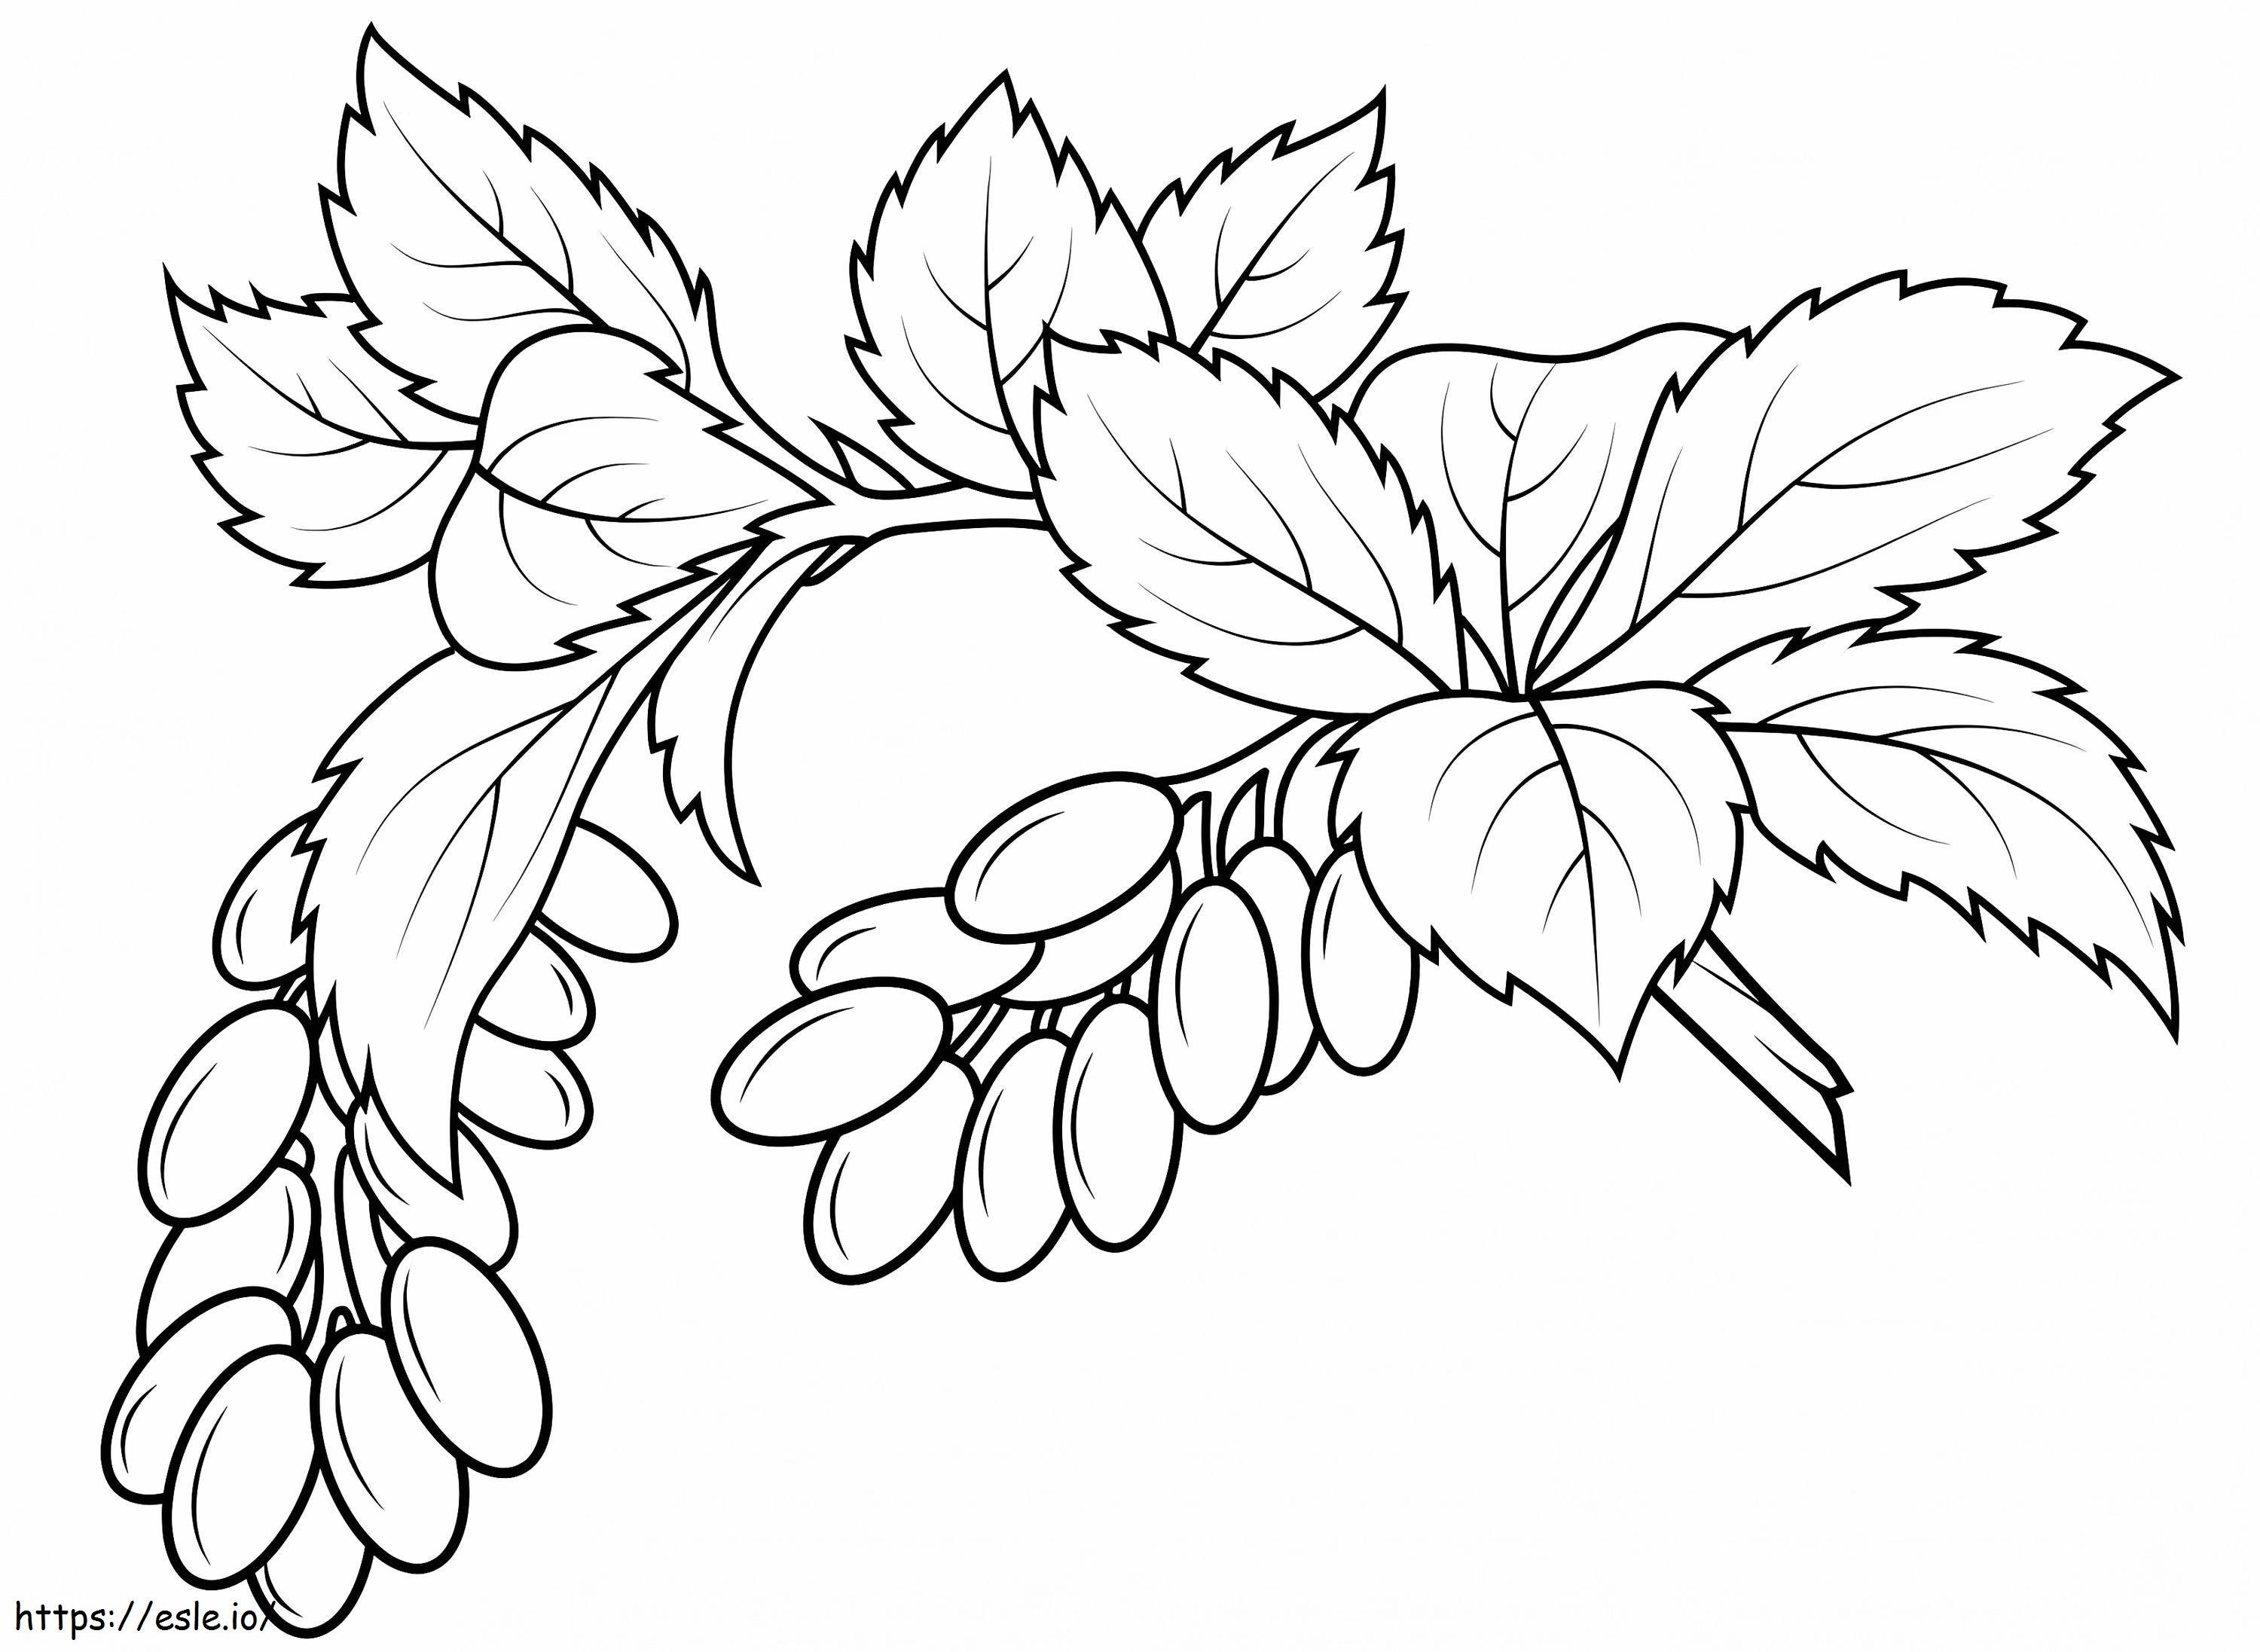 1559787625 Berry Branch A4 coloring page